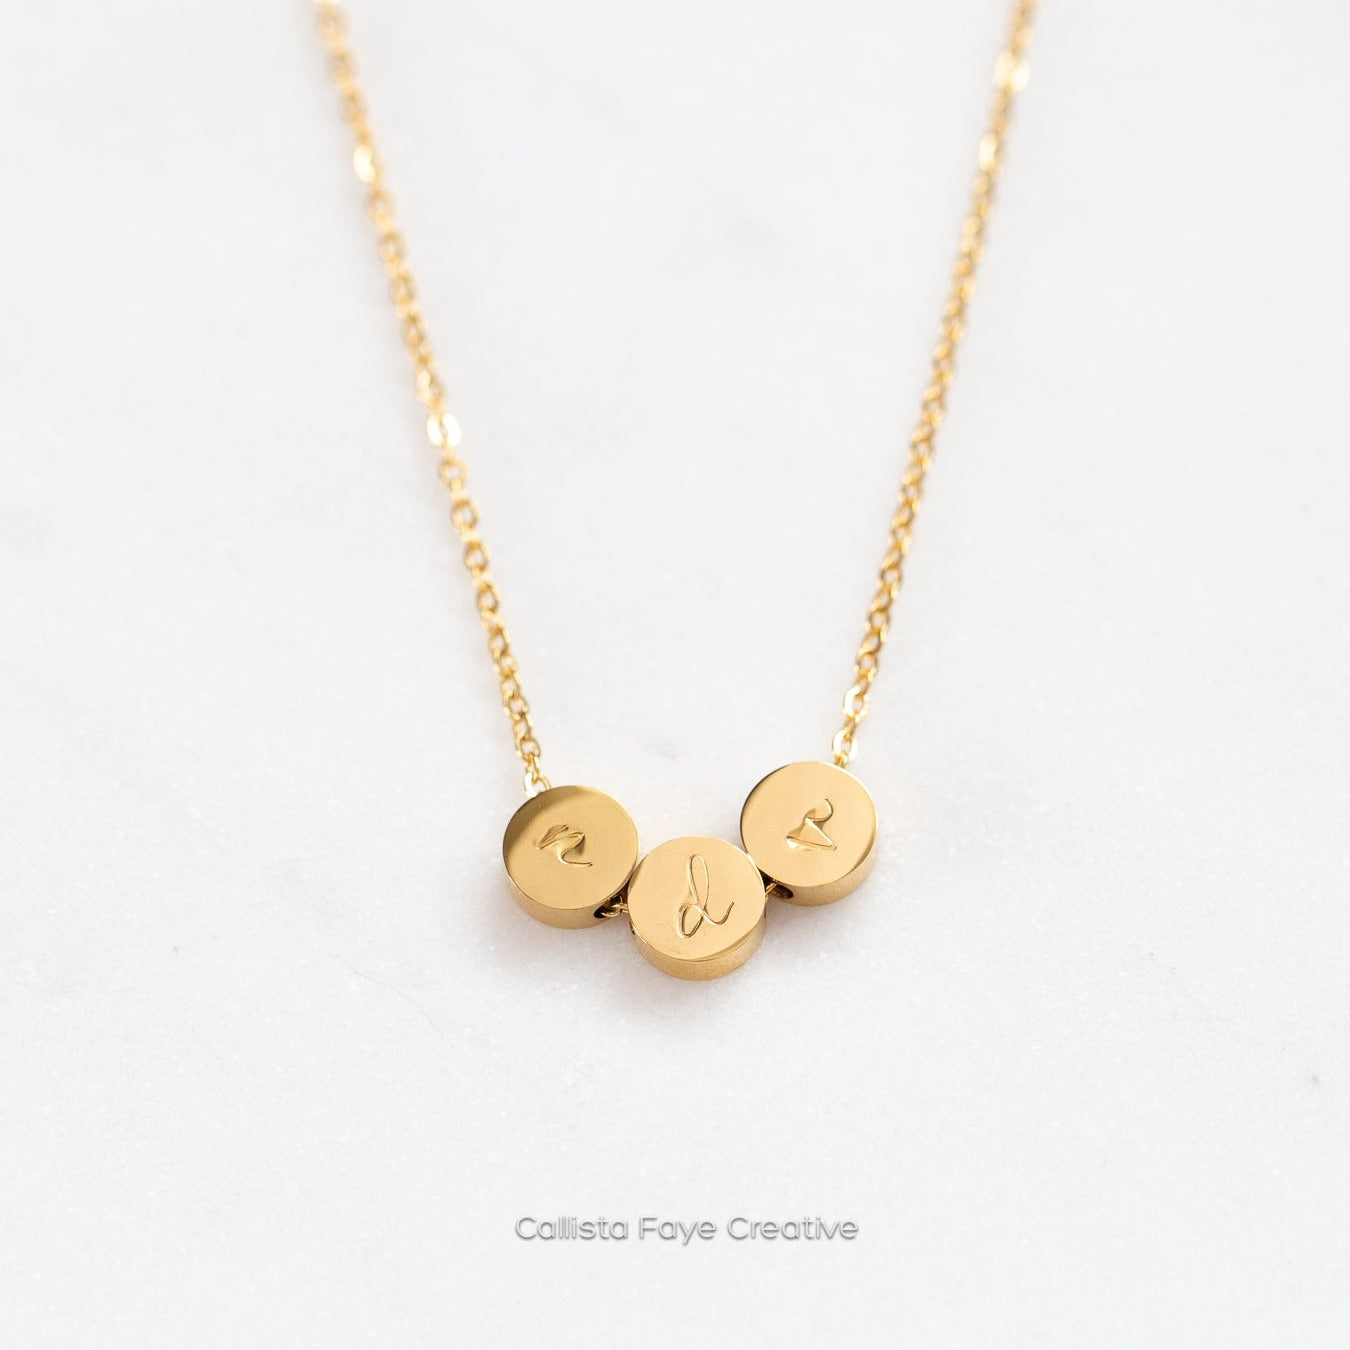 Custom Initial, Birth Flower Mini Coin Bead Necklace, Personalized Necklaces callistafaye 3 Beads Gold 